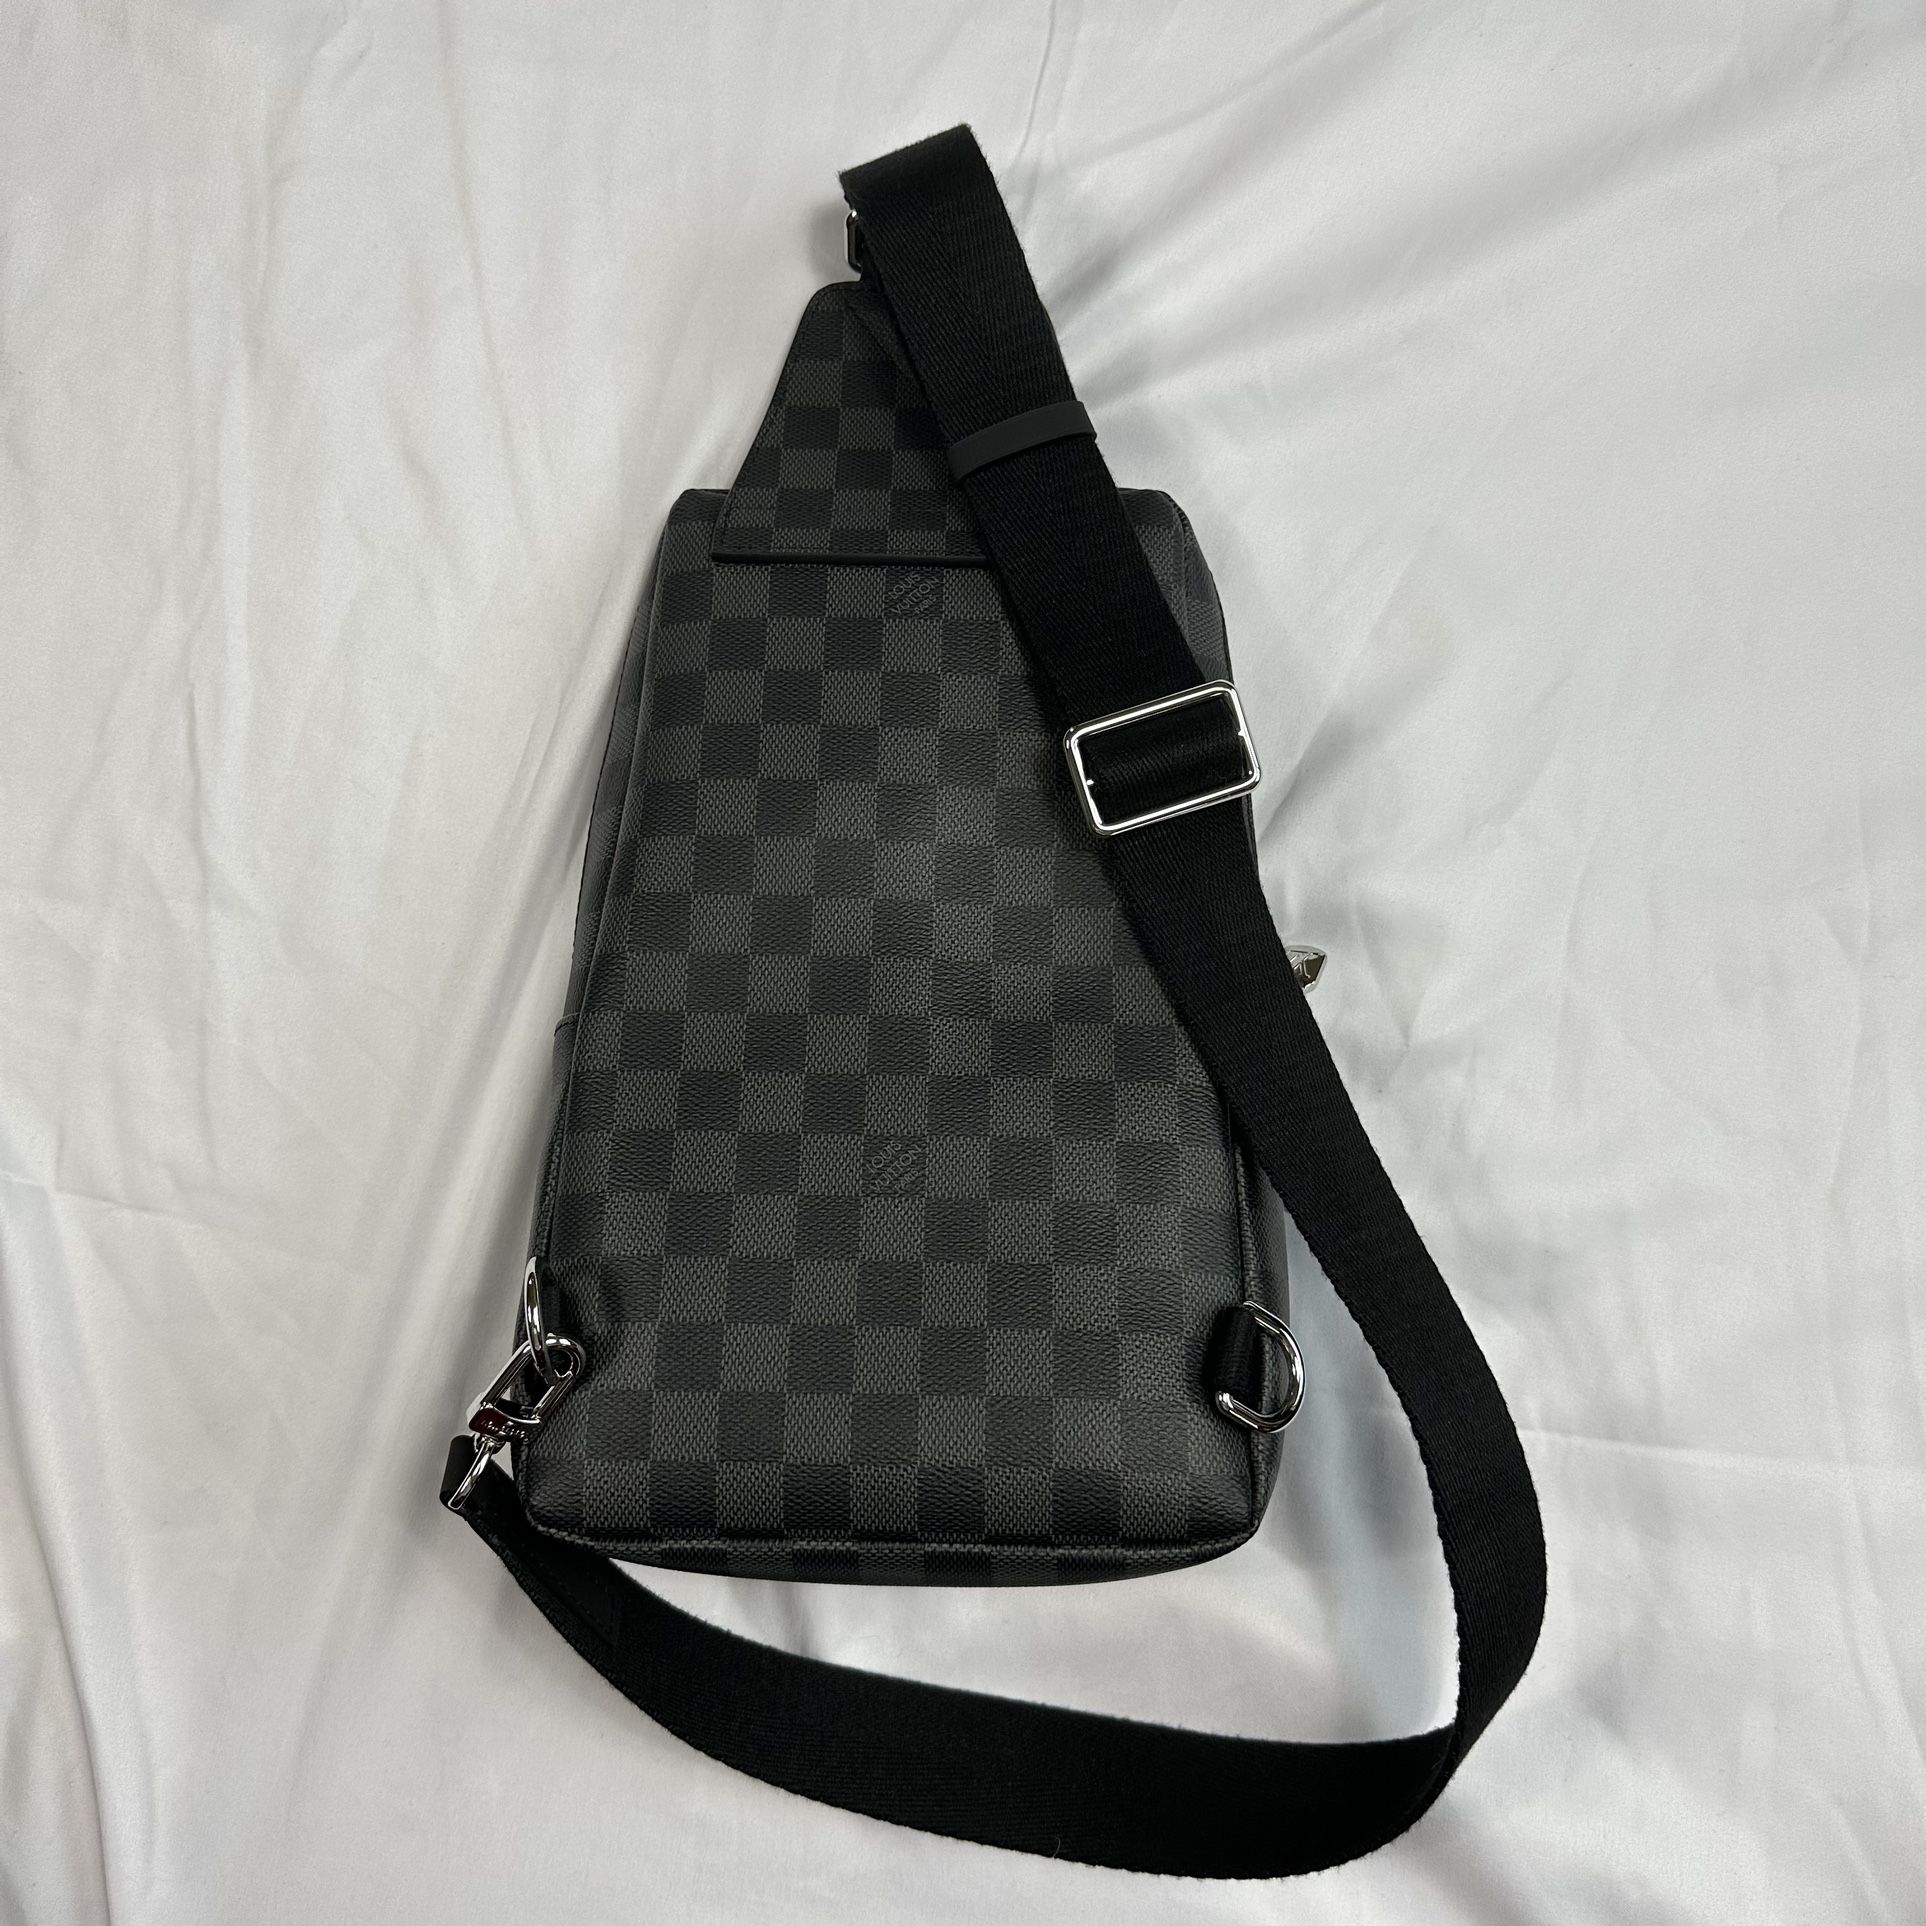 Louis vuitton avenue slingbag for Sale in Los Angeles, CA - OfferUp